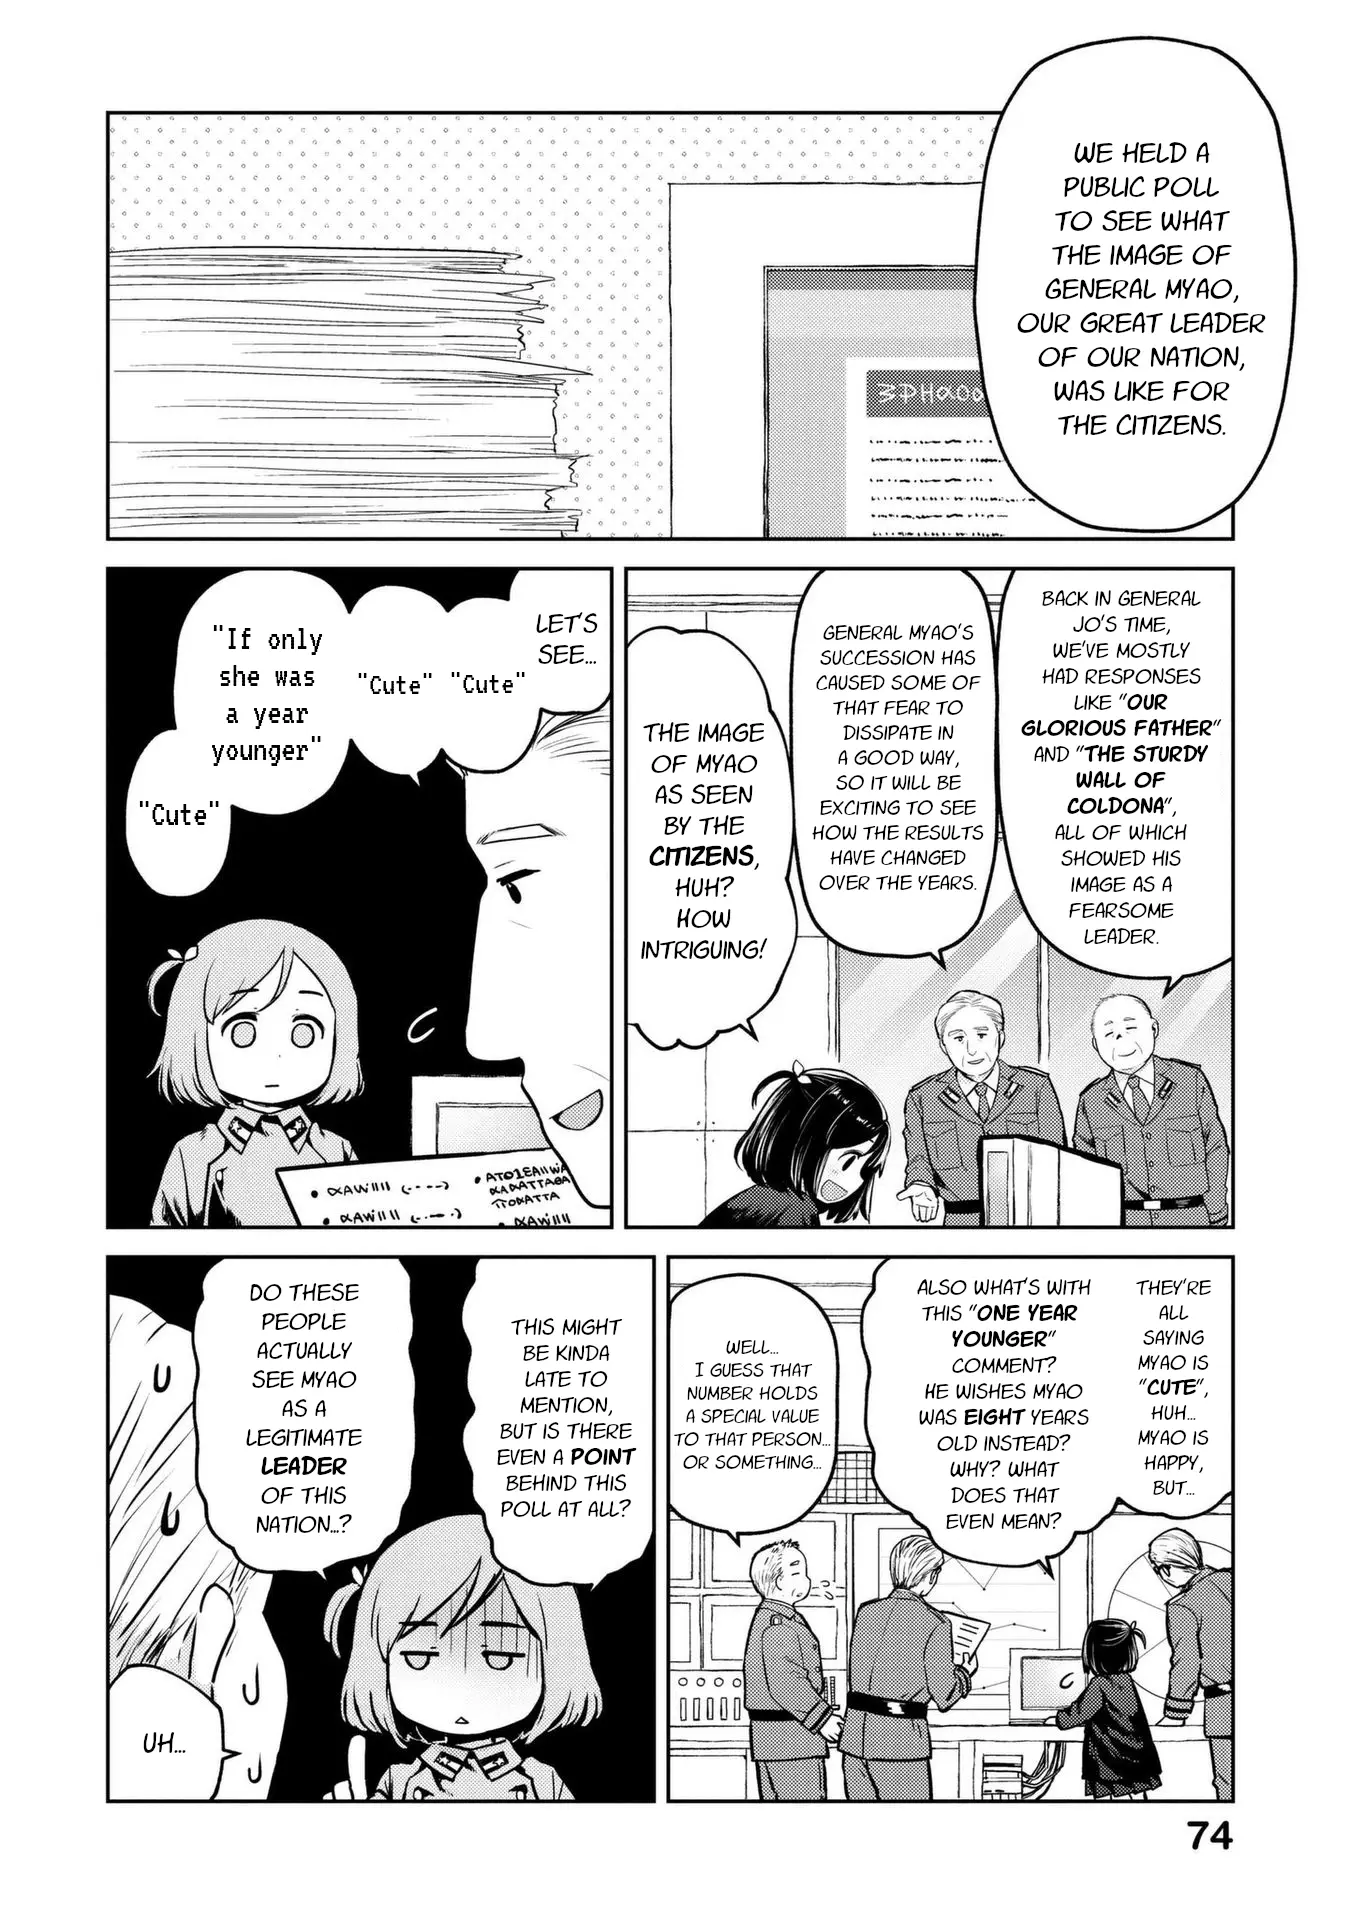 Oh, Our General Myao - 8 page 2